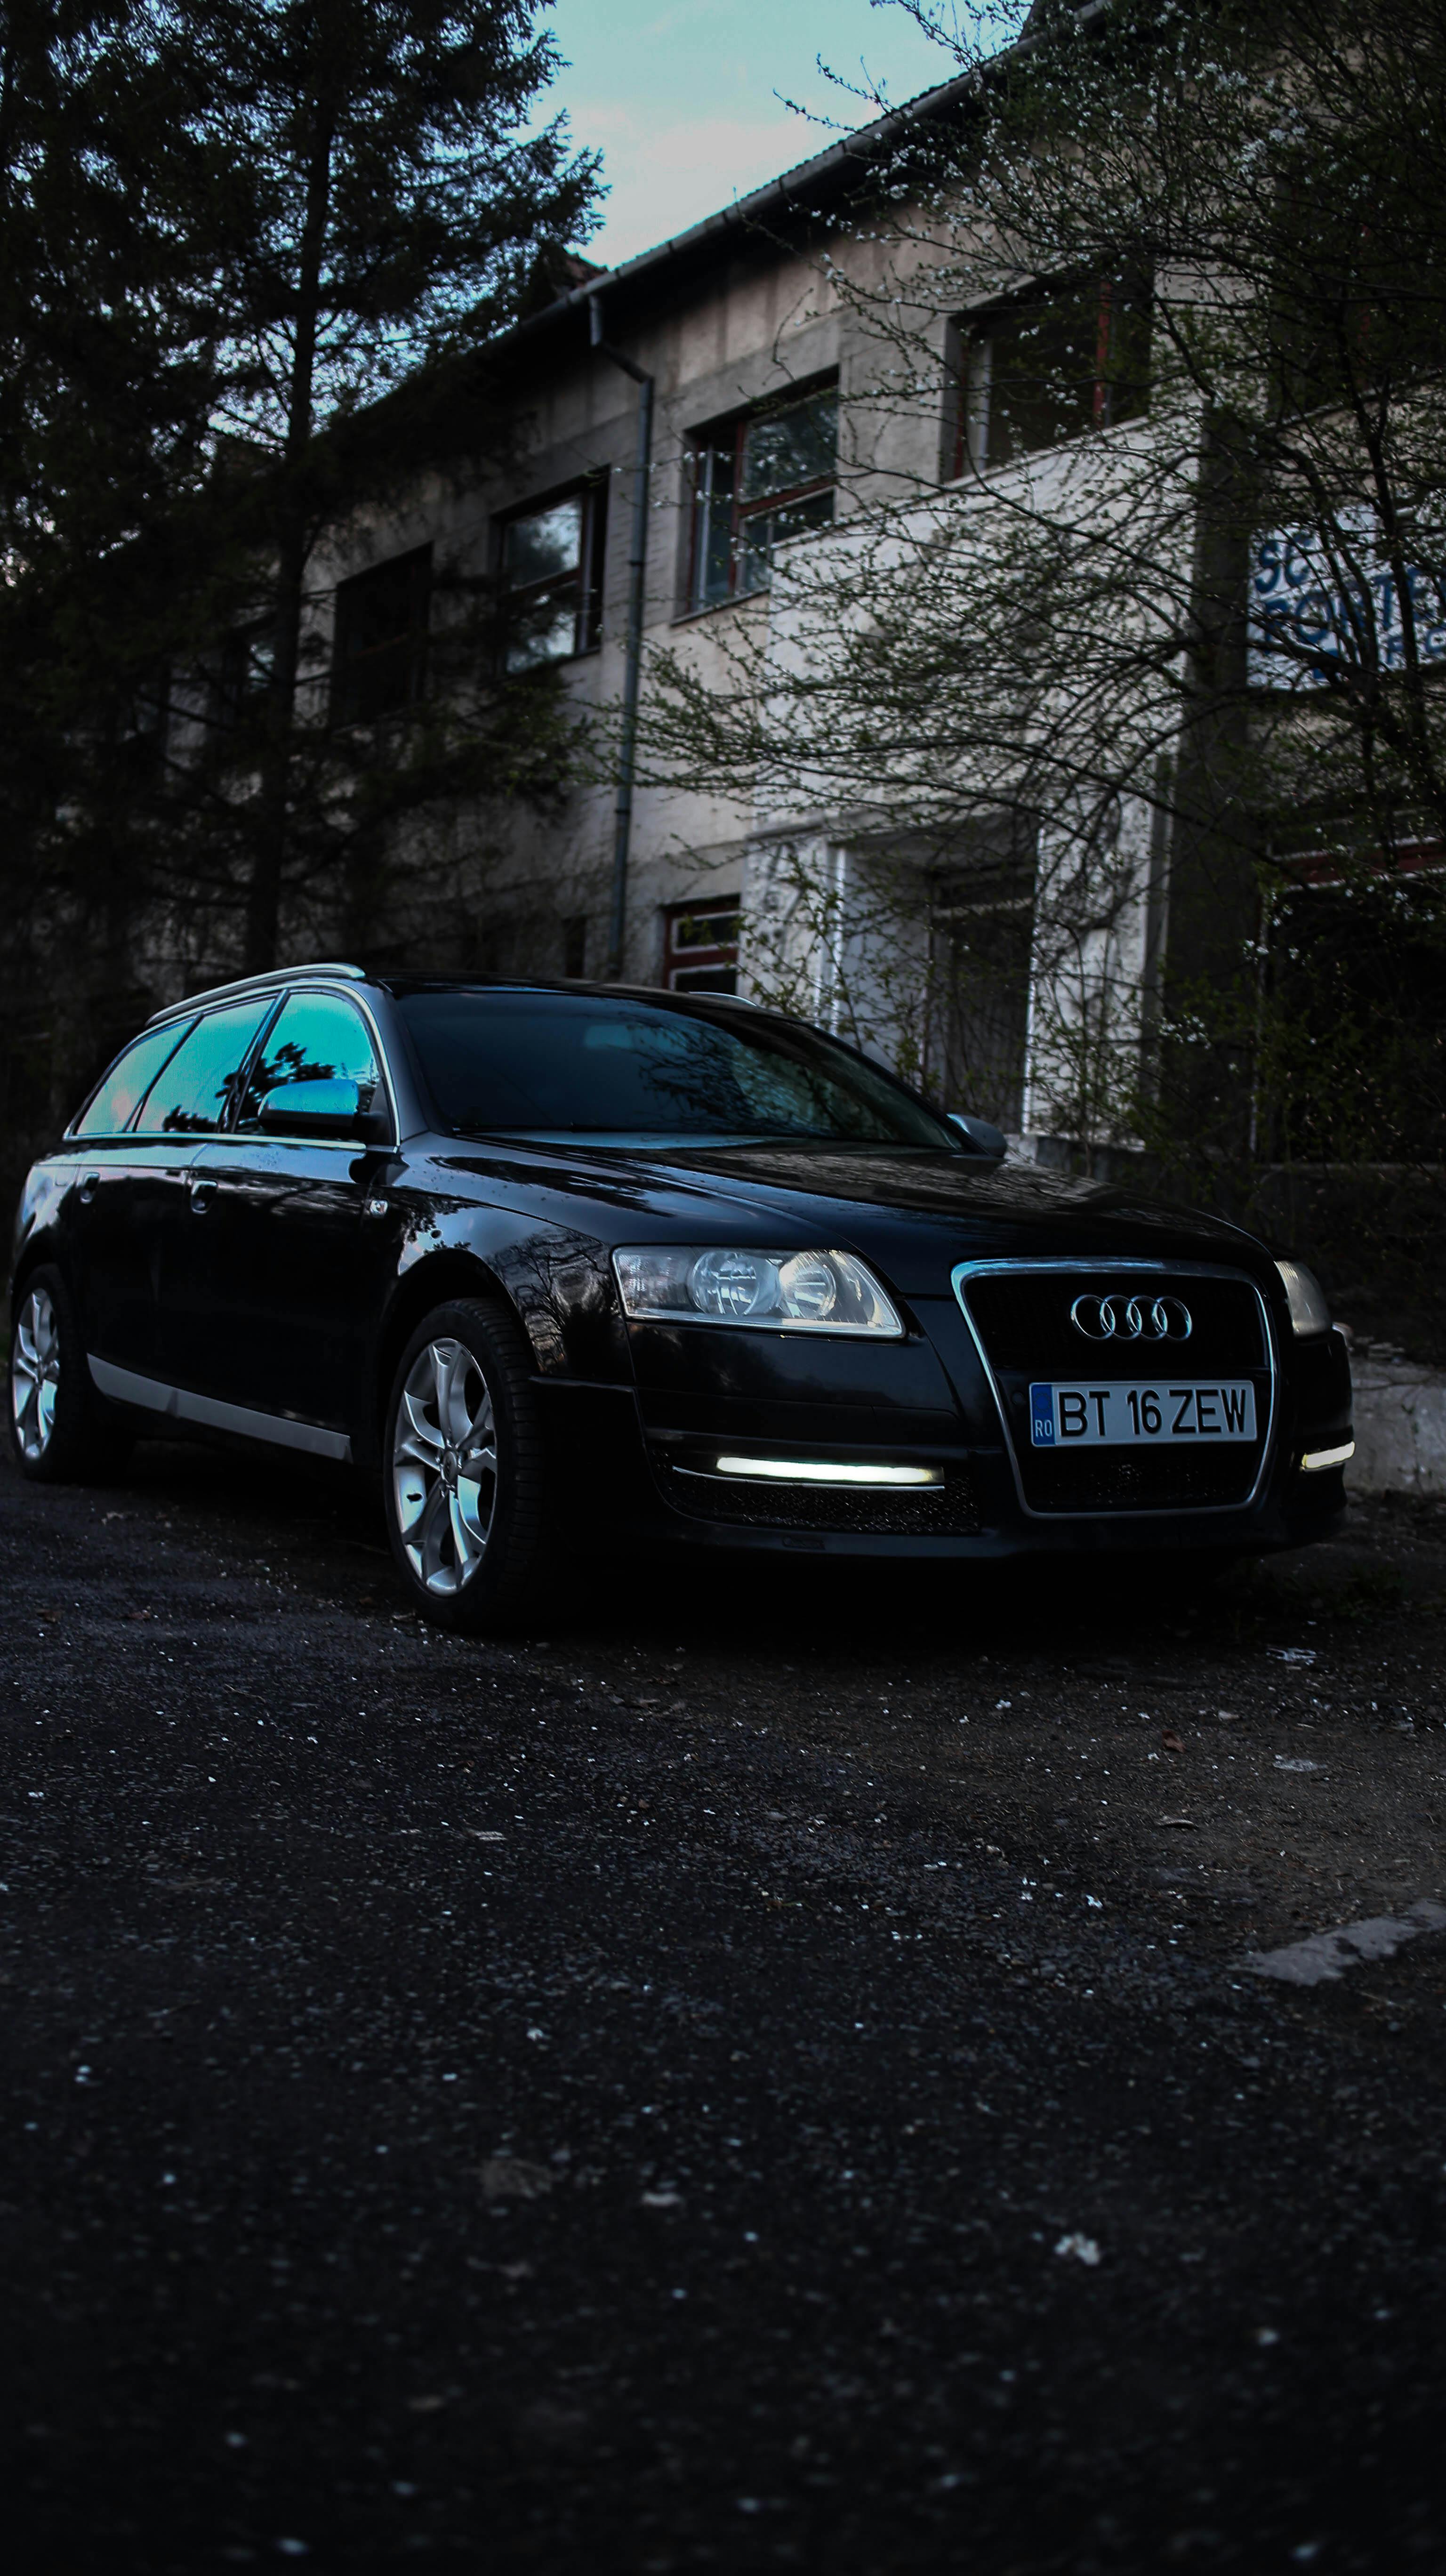 black audi coupe parked on the street